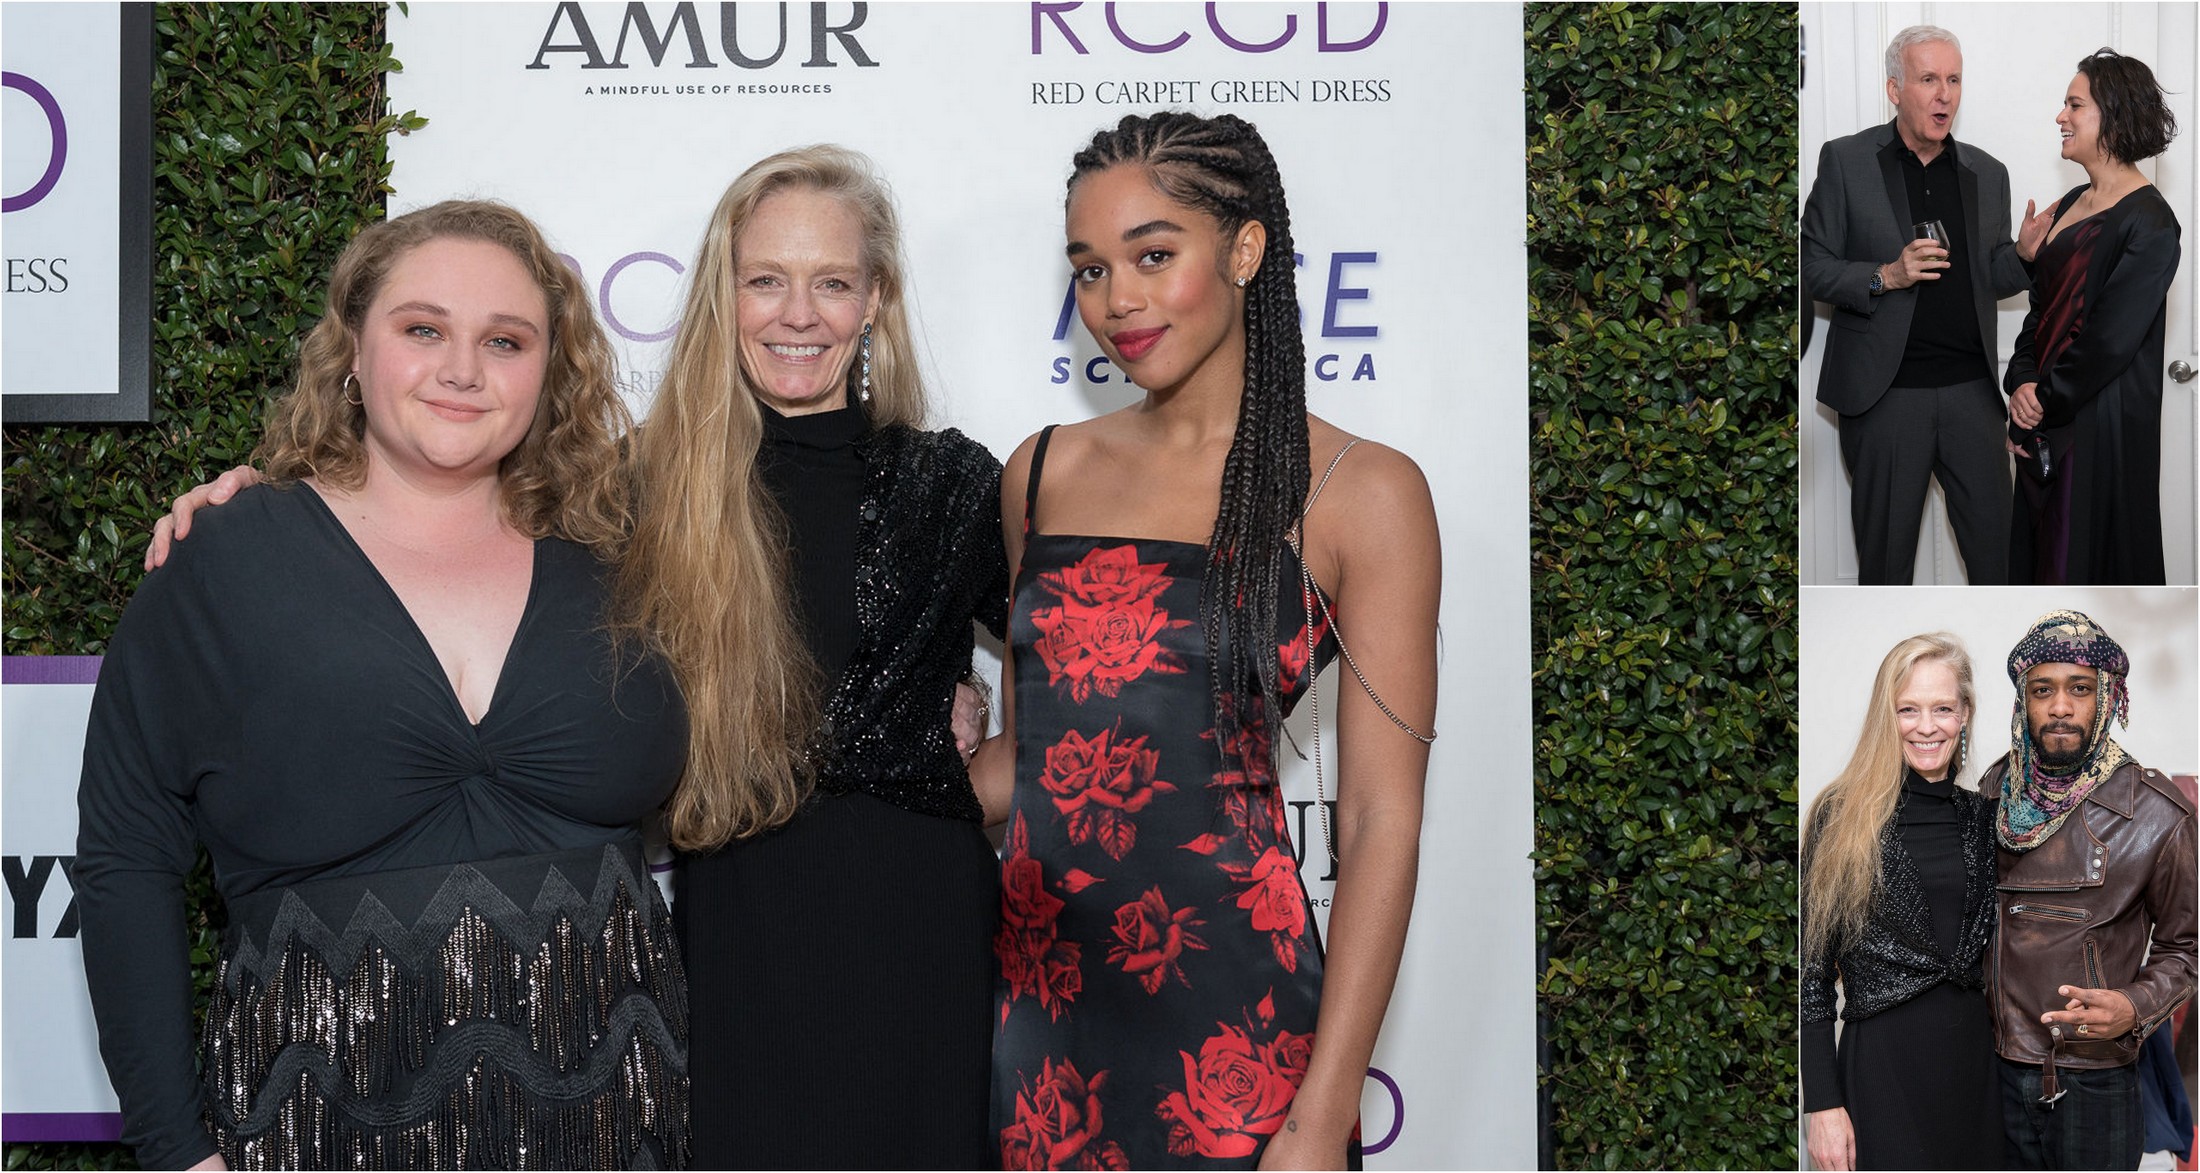 James Cameron, Laura Harrier, Danielle Macdonald, LaKeith Stanfield, Michelle Rodriguez and More Celebrate Red Carpet Green Dress 10 Yr Anniversary